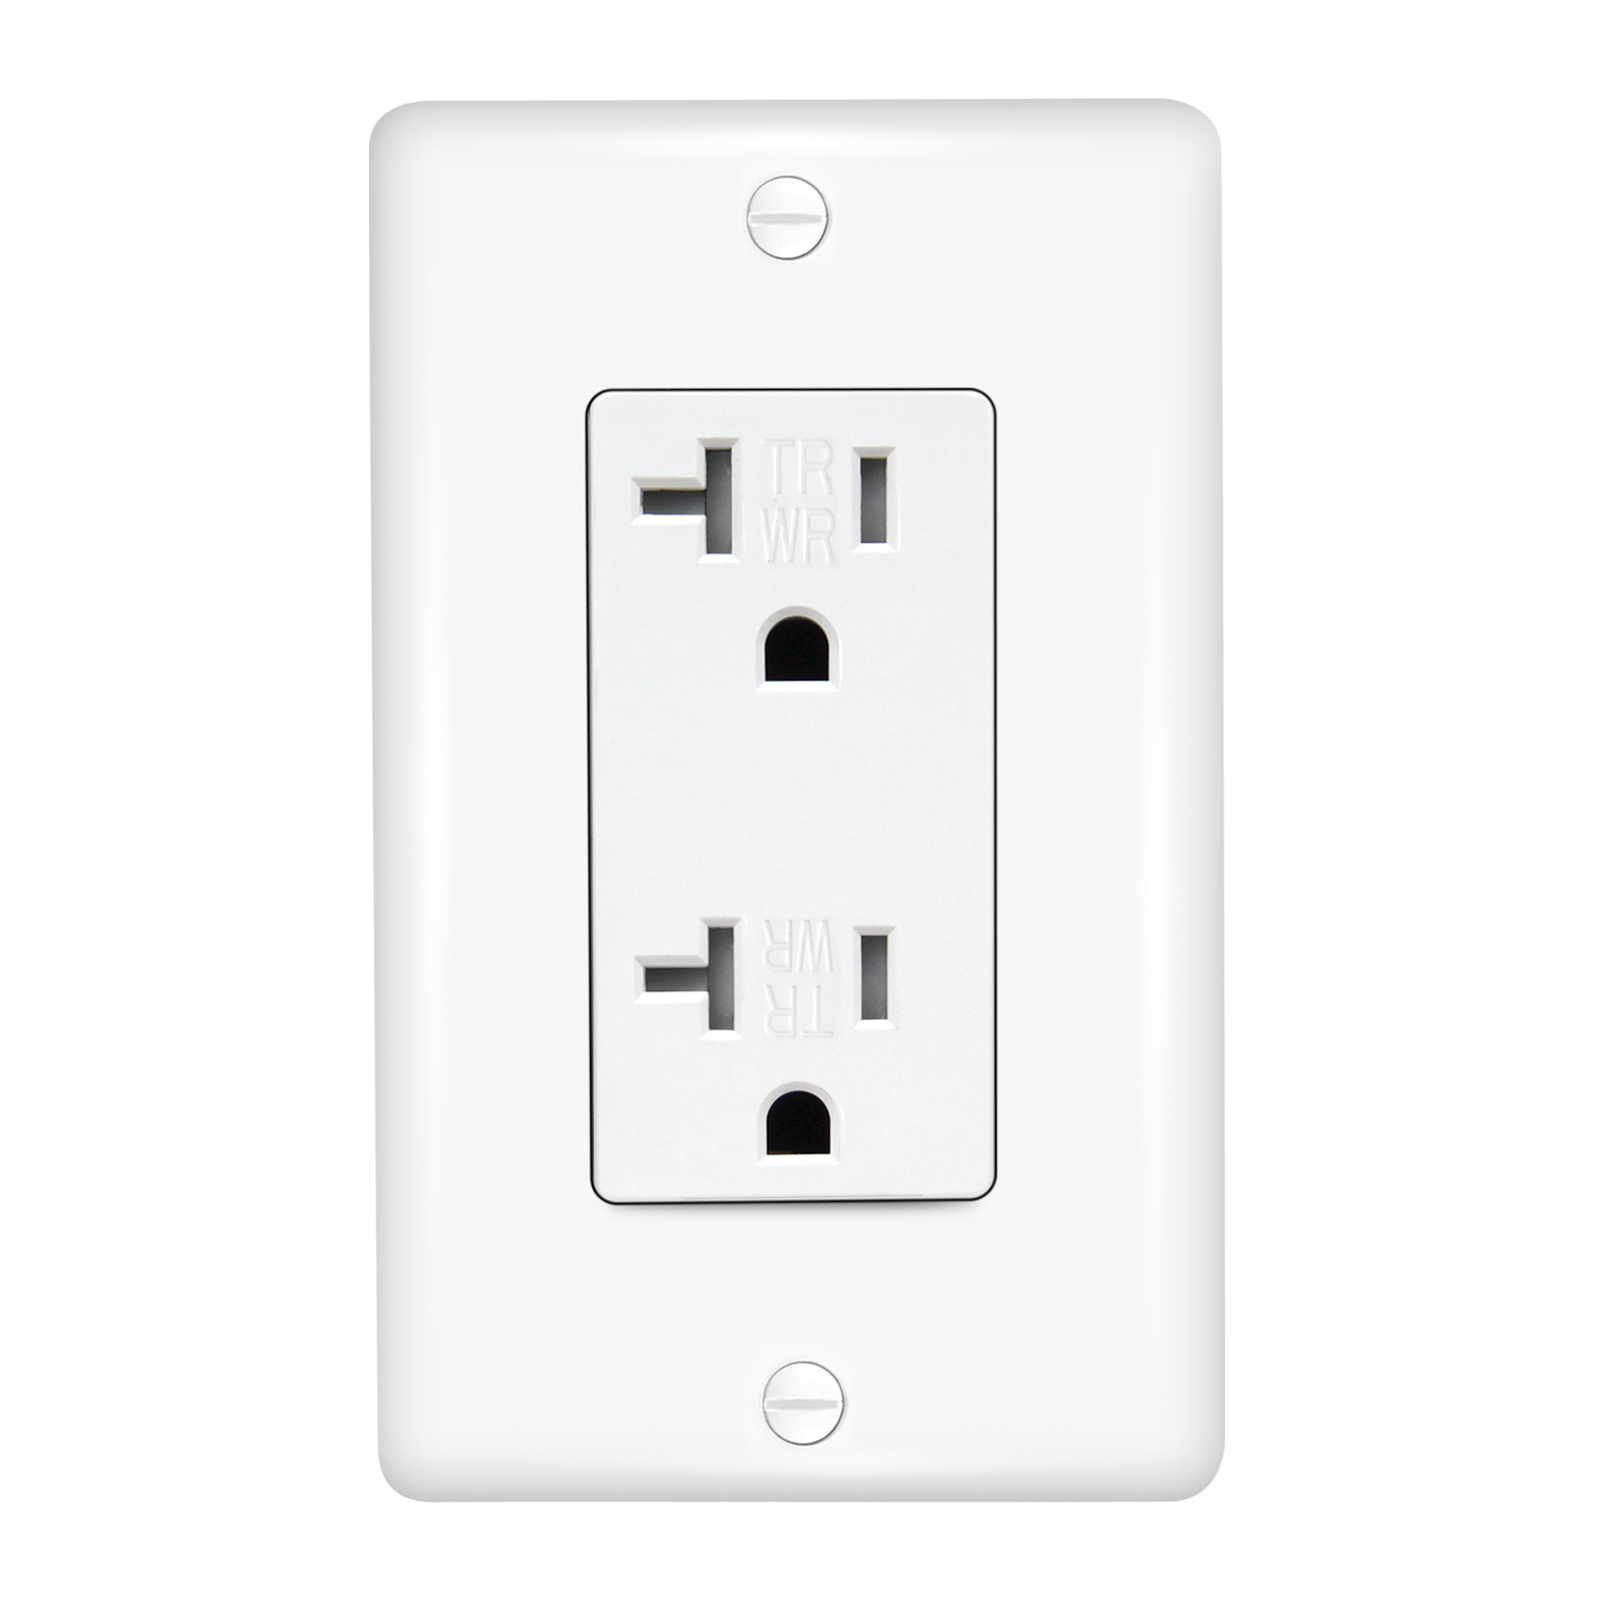 20A outdoor receptacle